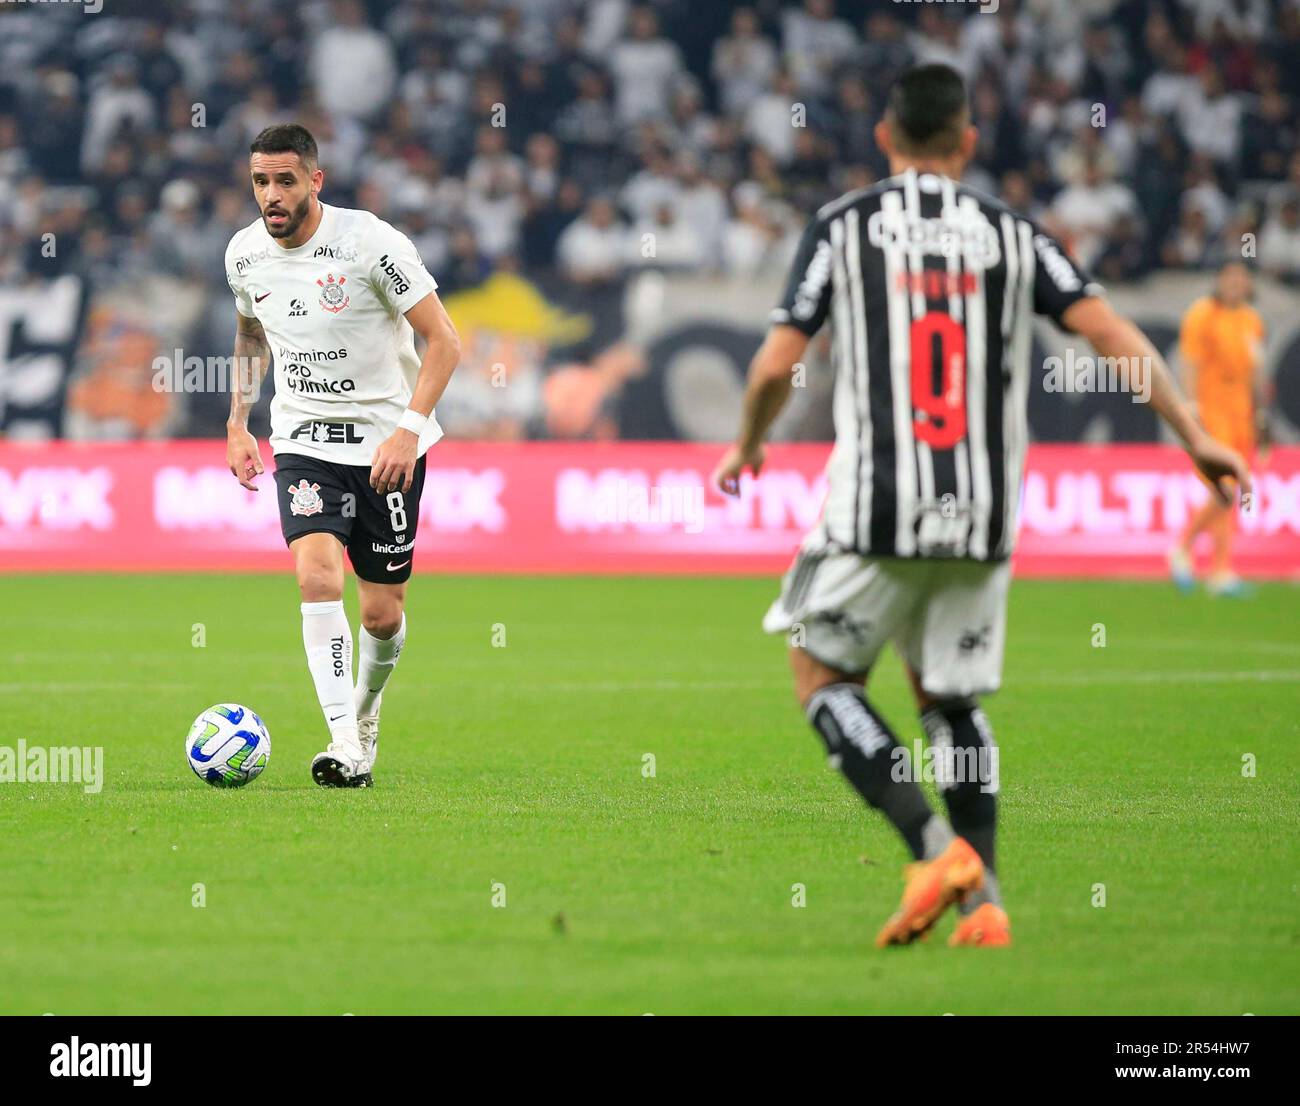 Sao Paulo, Brazil. 31st May, 2023. Renato Augusto during a match between Corinthians and Atletico Mineiro at Neo Quimica Arena in Sao Paulo, Brazil (Fernando Roberto/SPP) Credit: SPP Sport Press Photo. /Alamy Live News Stock Photo